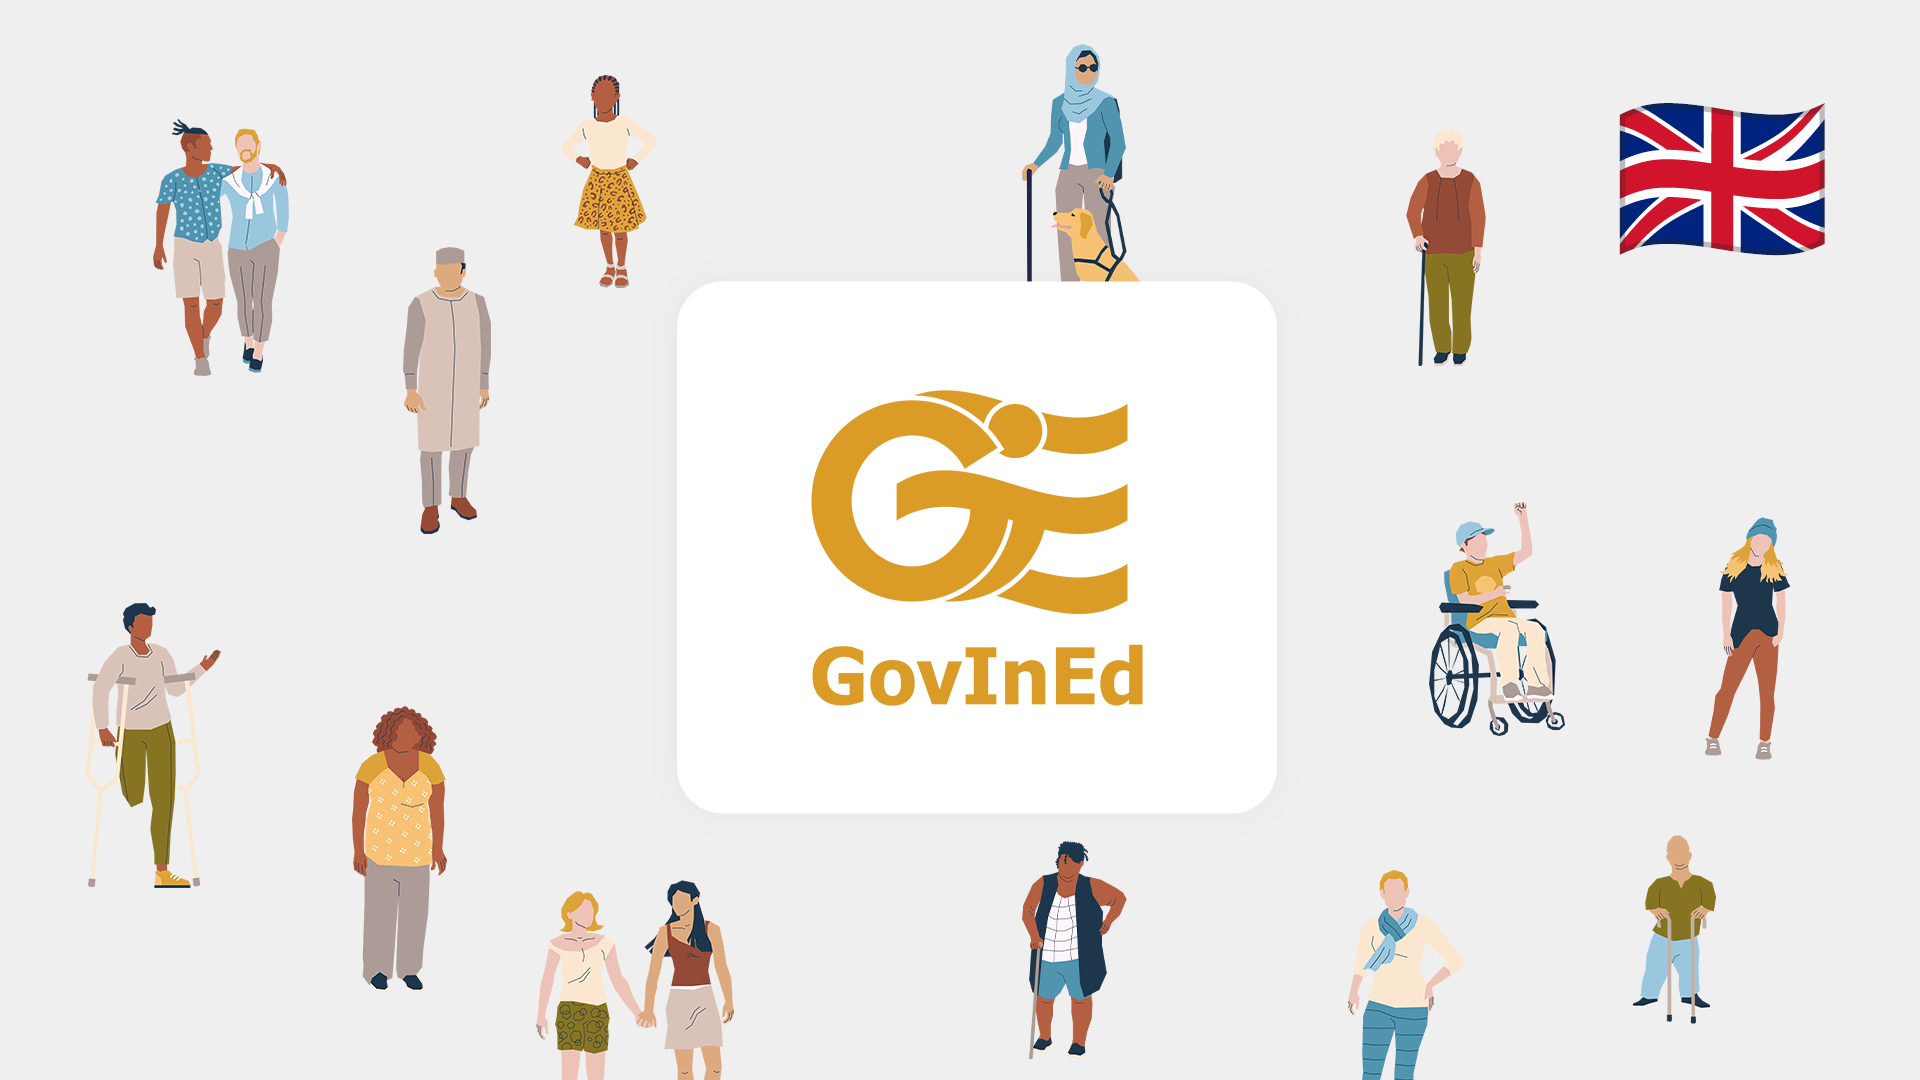 An illustration titled "GovInEd" shows diverse individuals around the logo. A British flag is in the top right corner to symbolize that this is the english version of the course